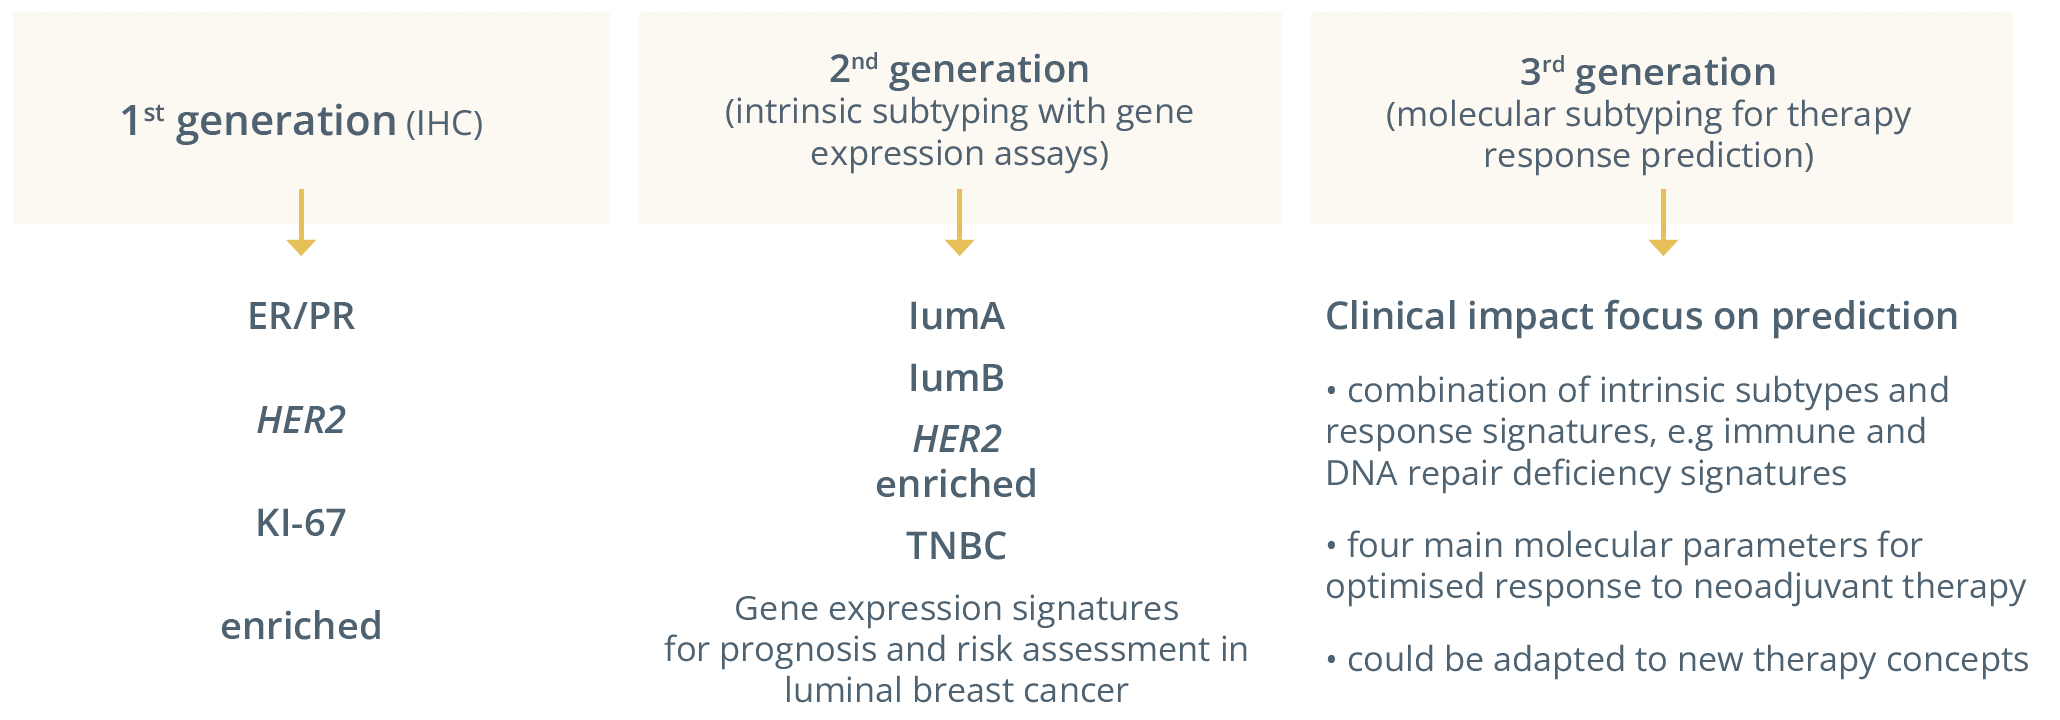 The first generation tumour classification method involved IHC, the 2nd generation was intrinsic subtyping with gene expression arrays, the 3rd generation aims to allow for molecular subtyping for therapy response prediction.